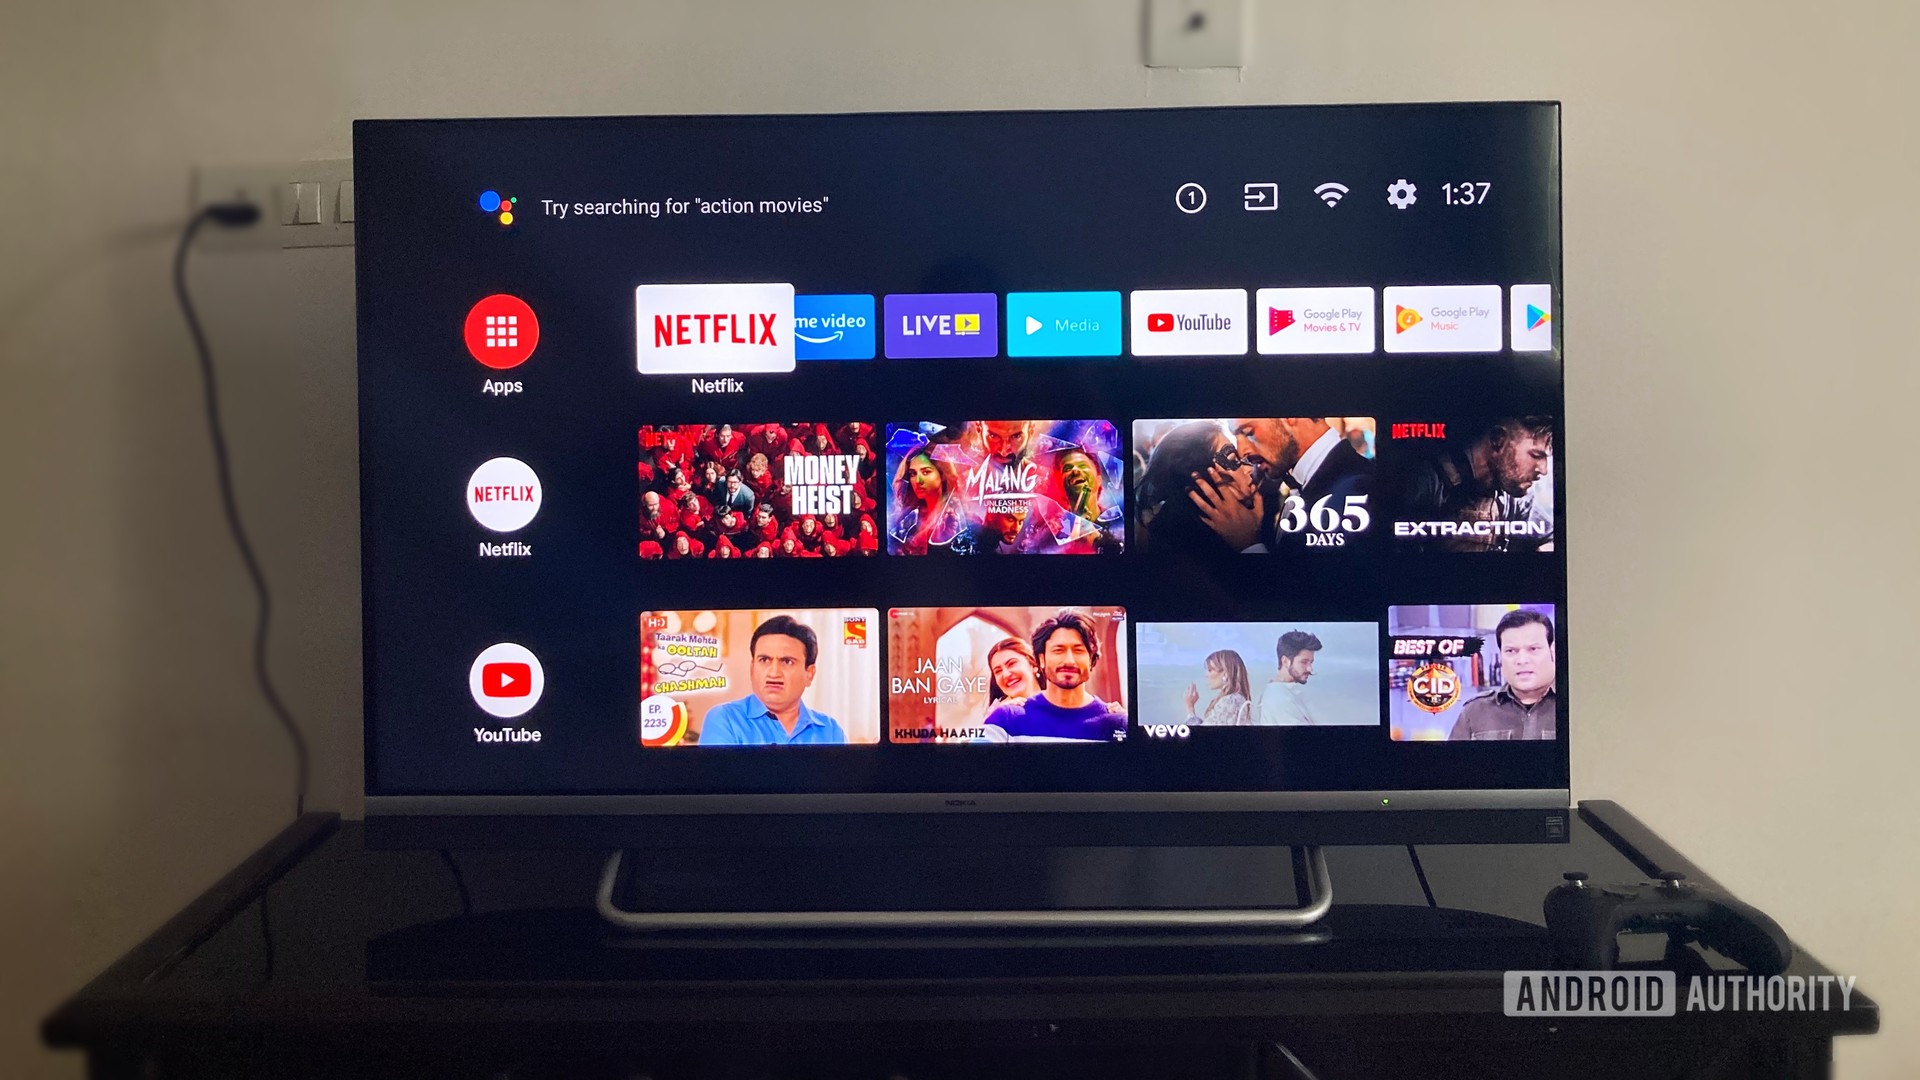 How to Control Android TV with Google Home